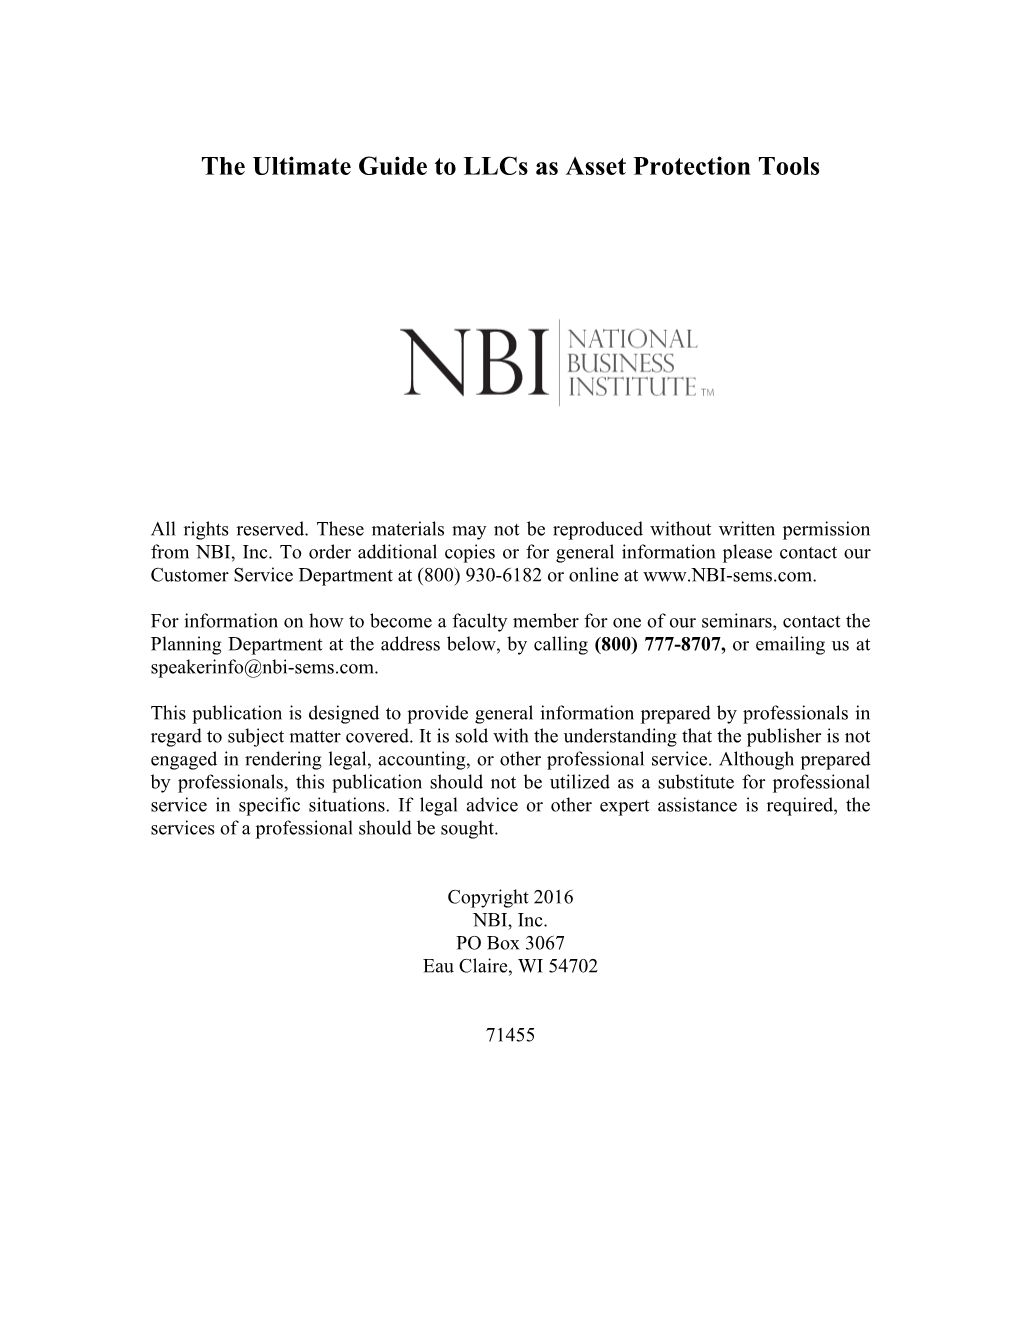 The Ultimate Guide to Llcs As Asset Protection Tools